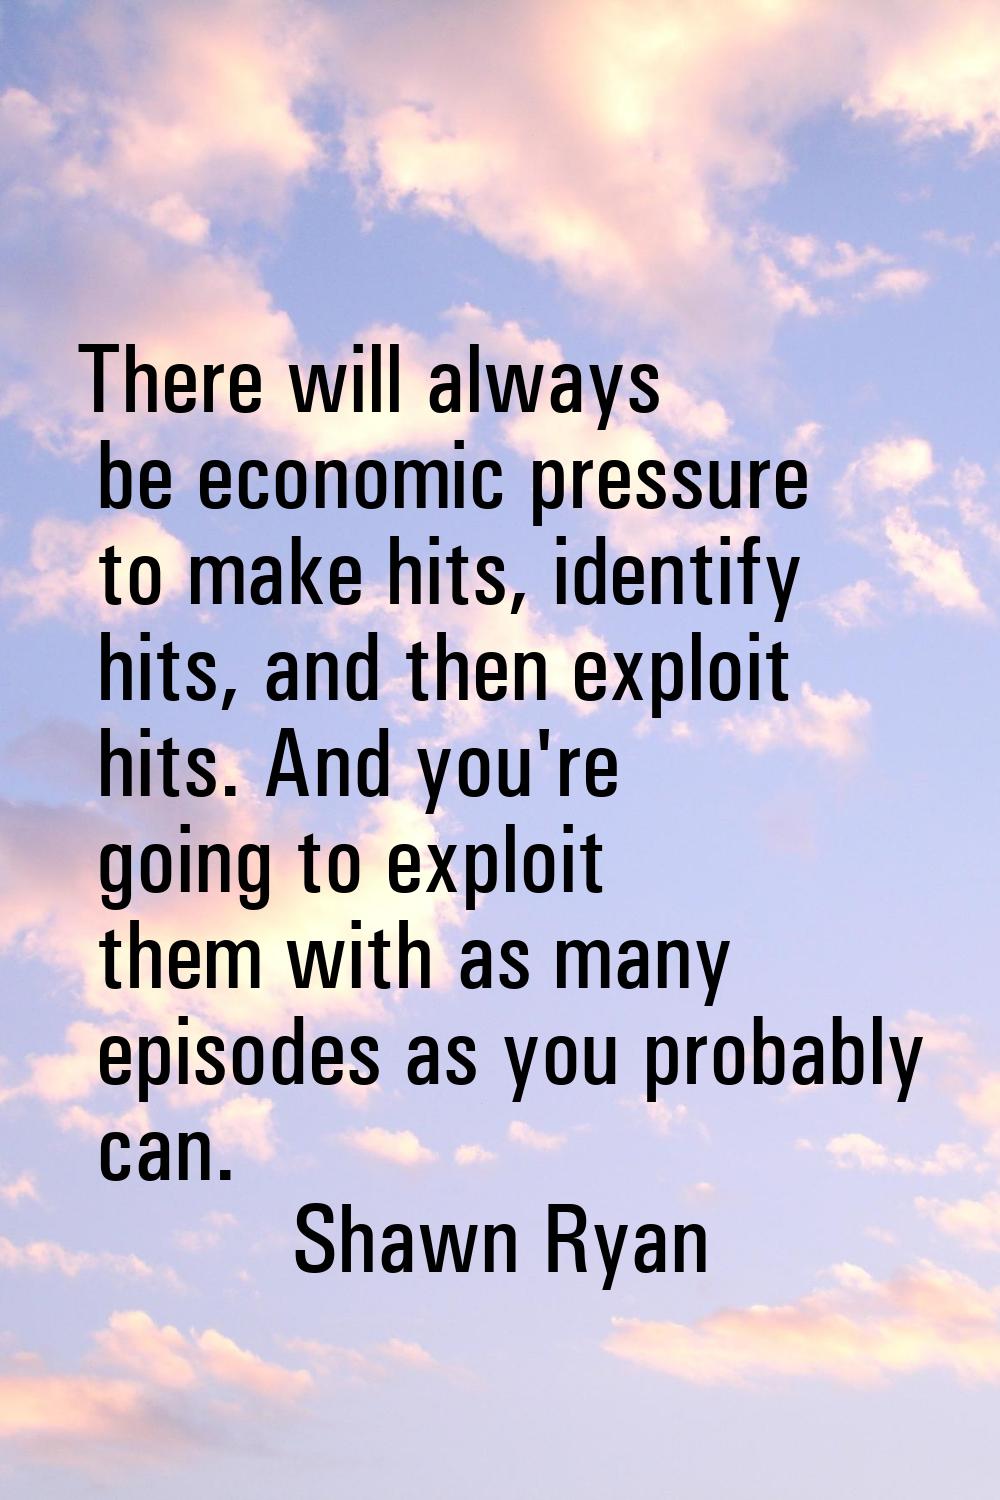 There will always be economic pressure to make hits, identify hits, and then exploit hits. And you'